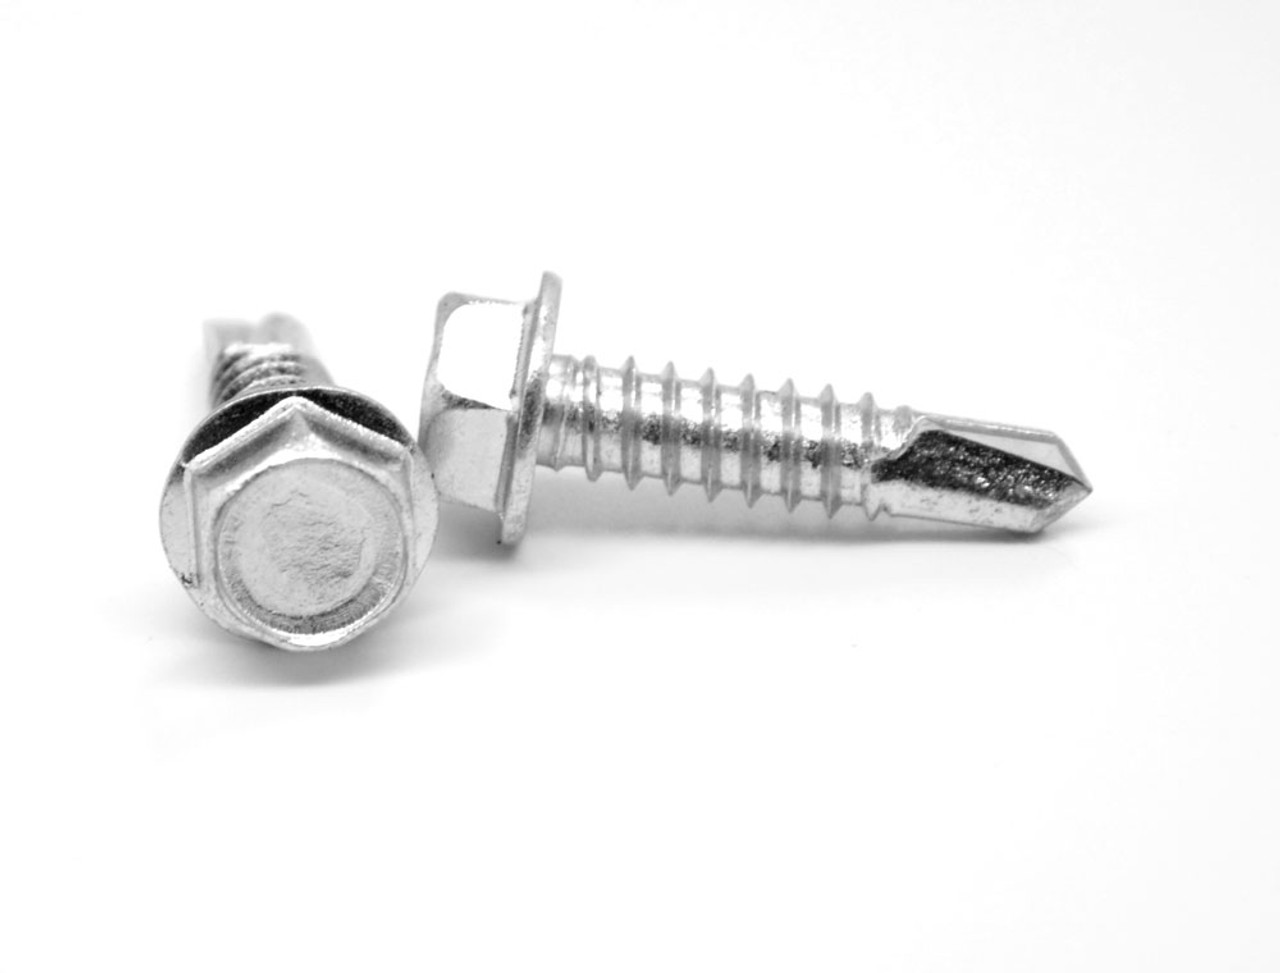 #12-14 x 1 1/2" (FT) Self Drilling Screw Hex Washer Head #3 Point Stainless Steel 410